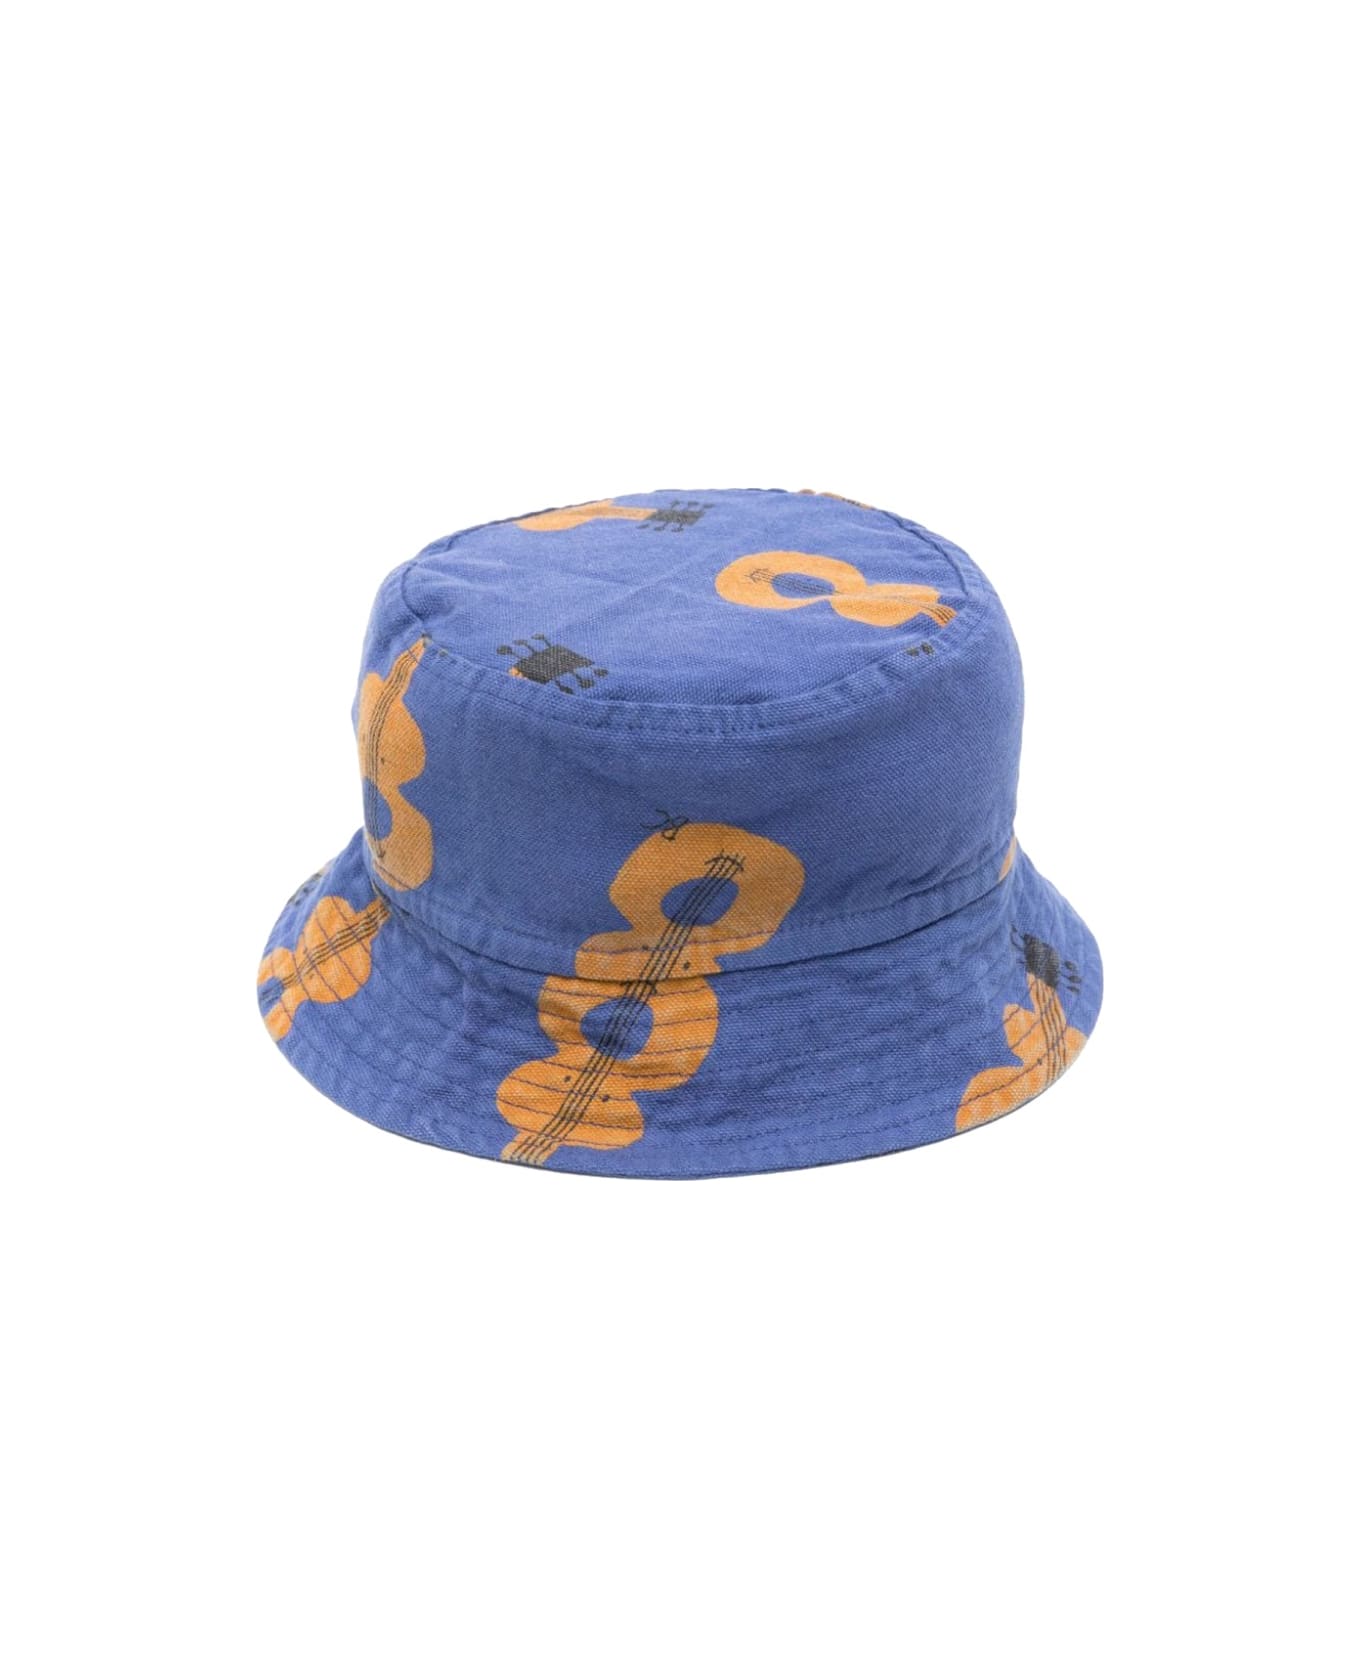 Bobo Choses Acoustic Guitar All Over Hat - BLUE